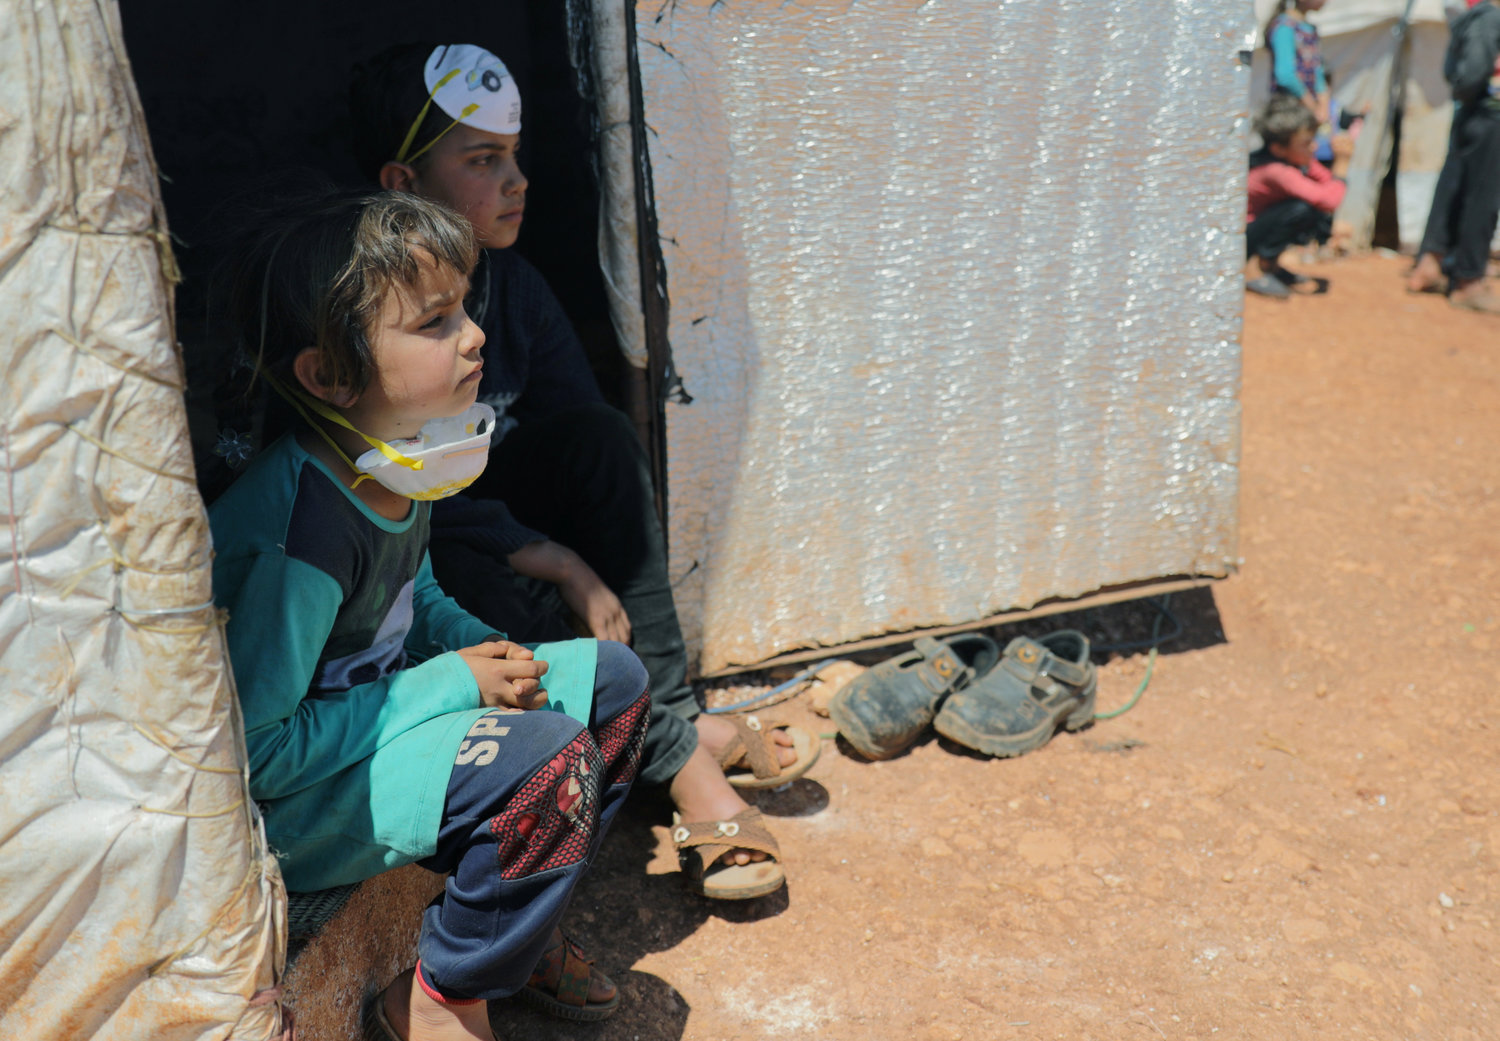 Displaced Syrian children are seen at a camp in Idlib April 14, 2020, during the COVID-19 pandemic. Internally displaced people, those forced to flee their homes, but who do not cross into another country, still often need protection and special assistance, including from the church, said a new Vatican document released May 5.